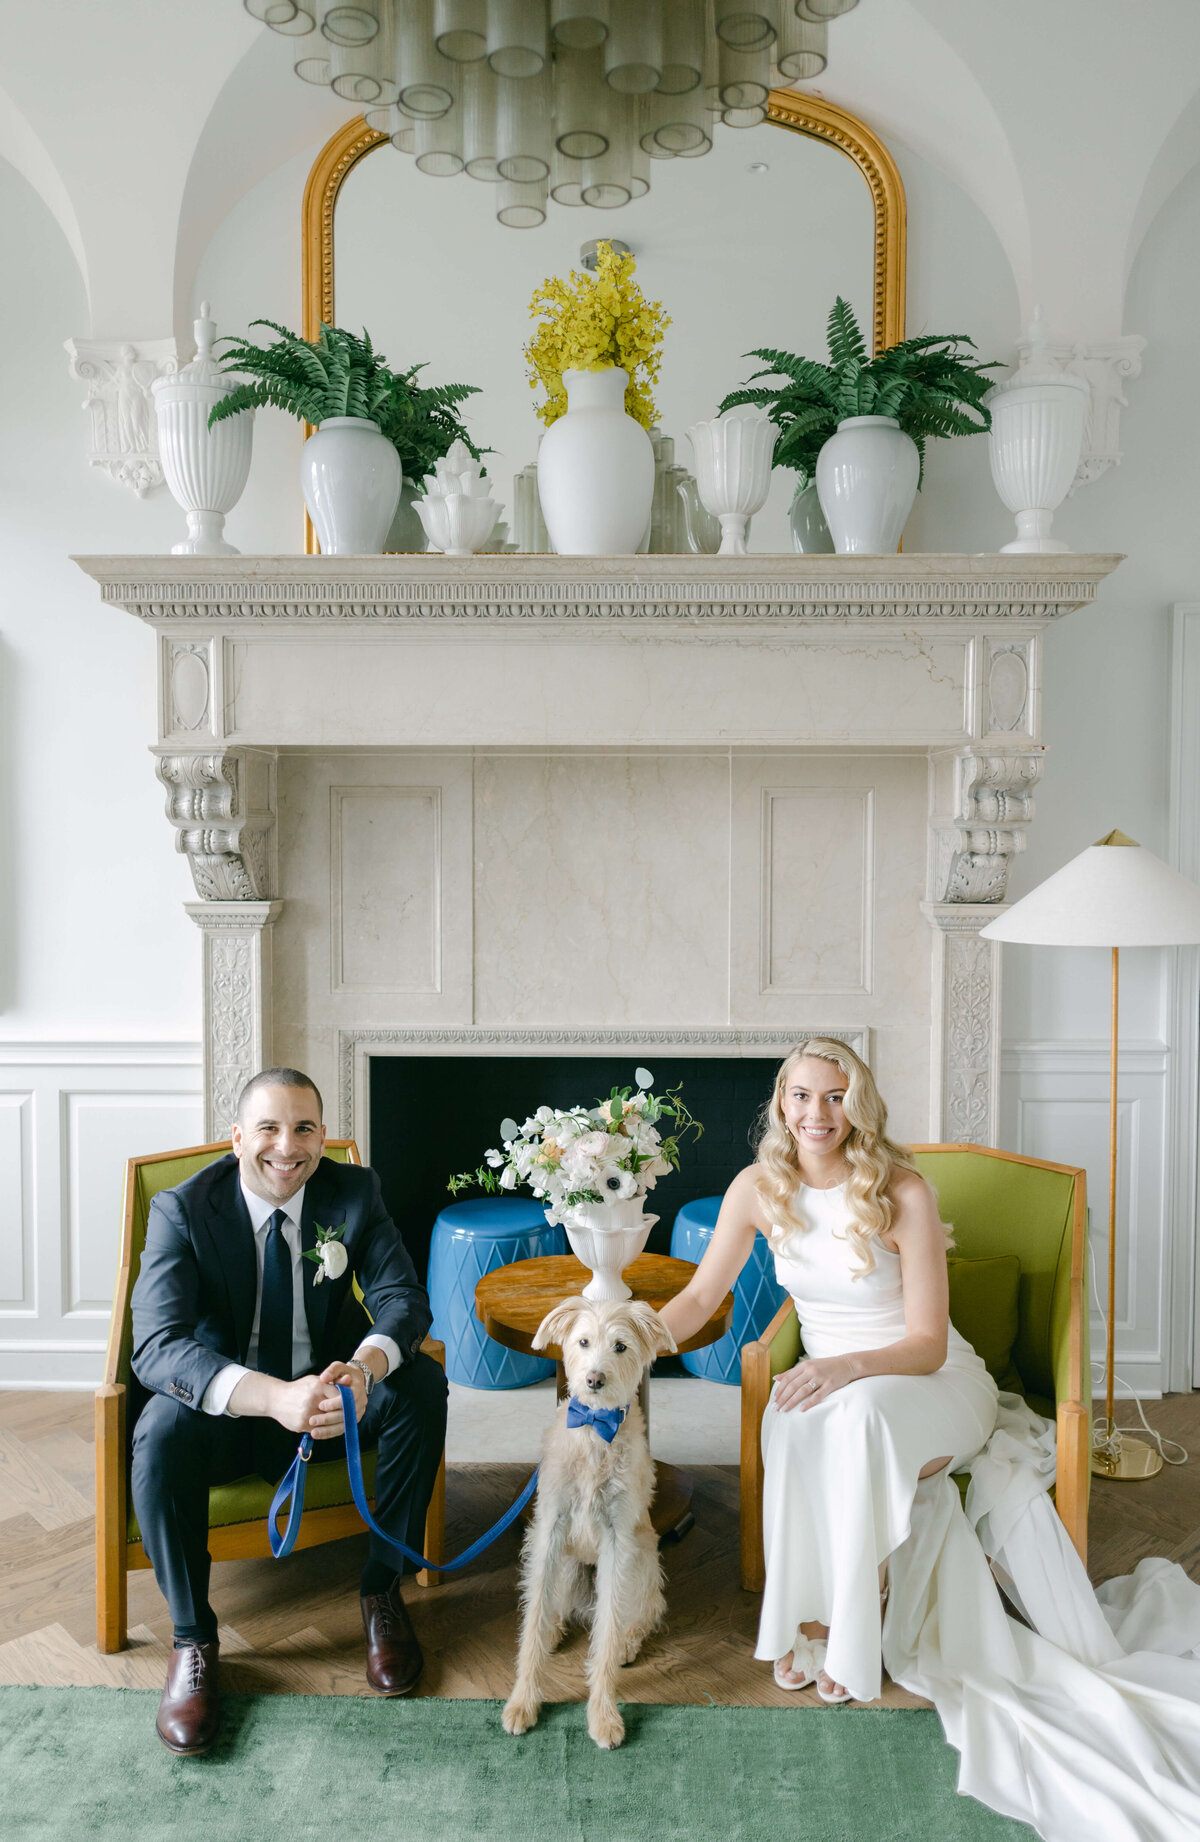 A bride and groom sit with their dog.